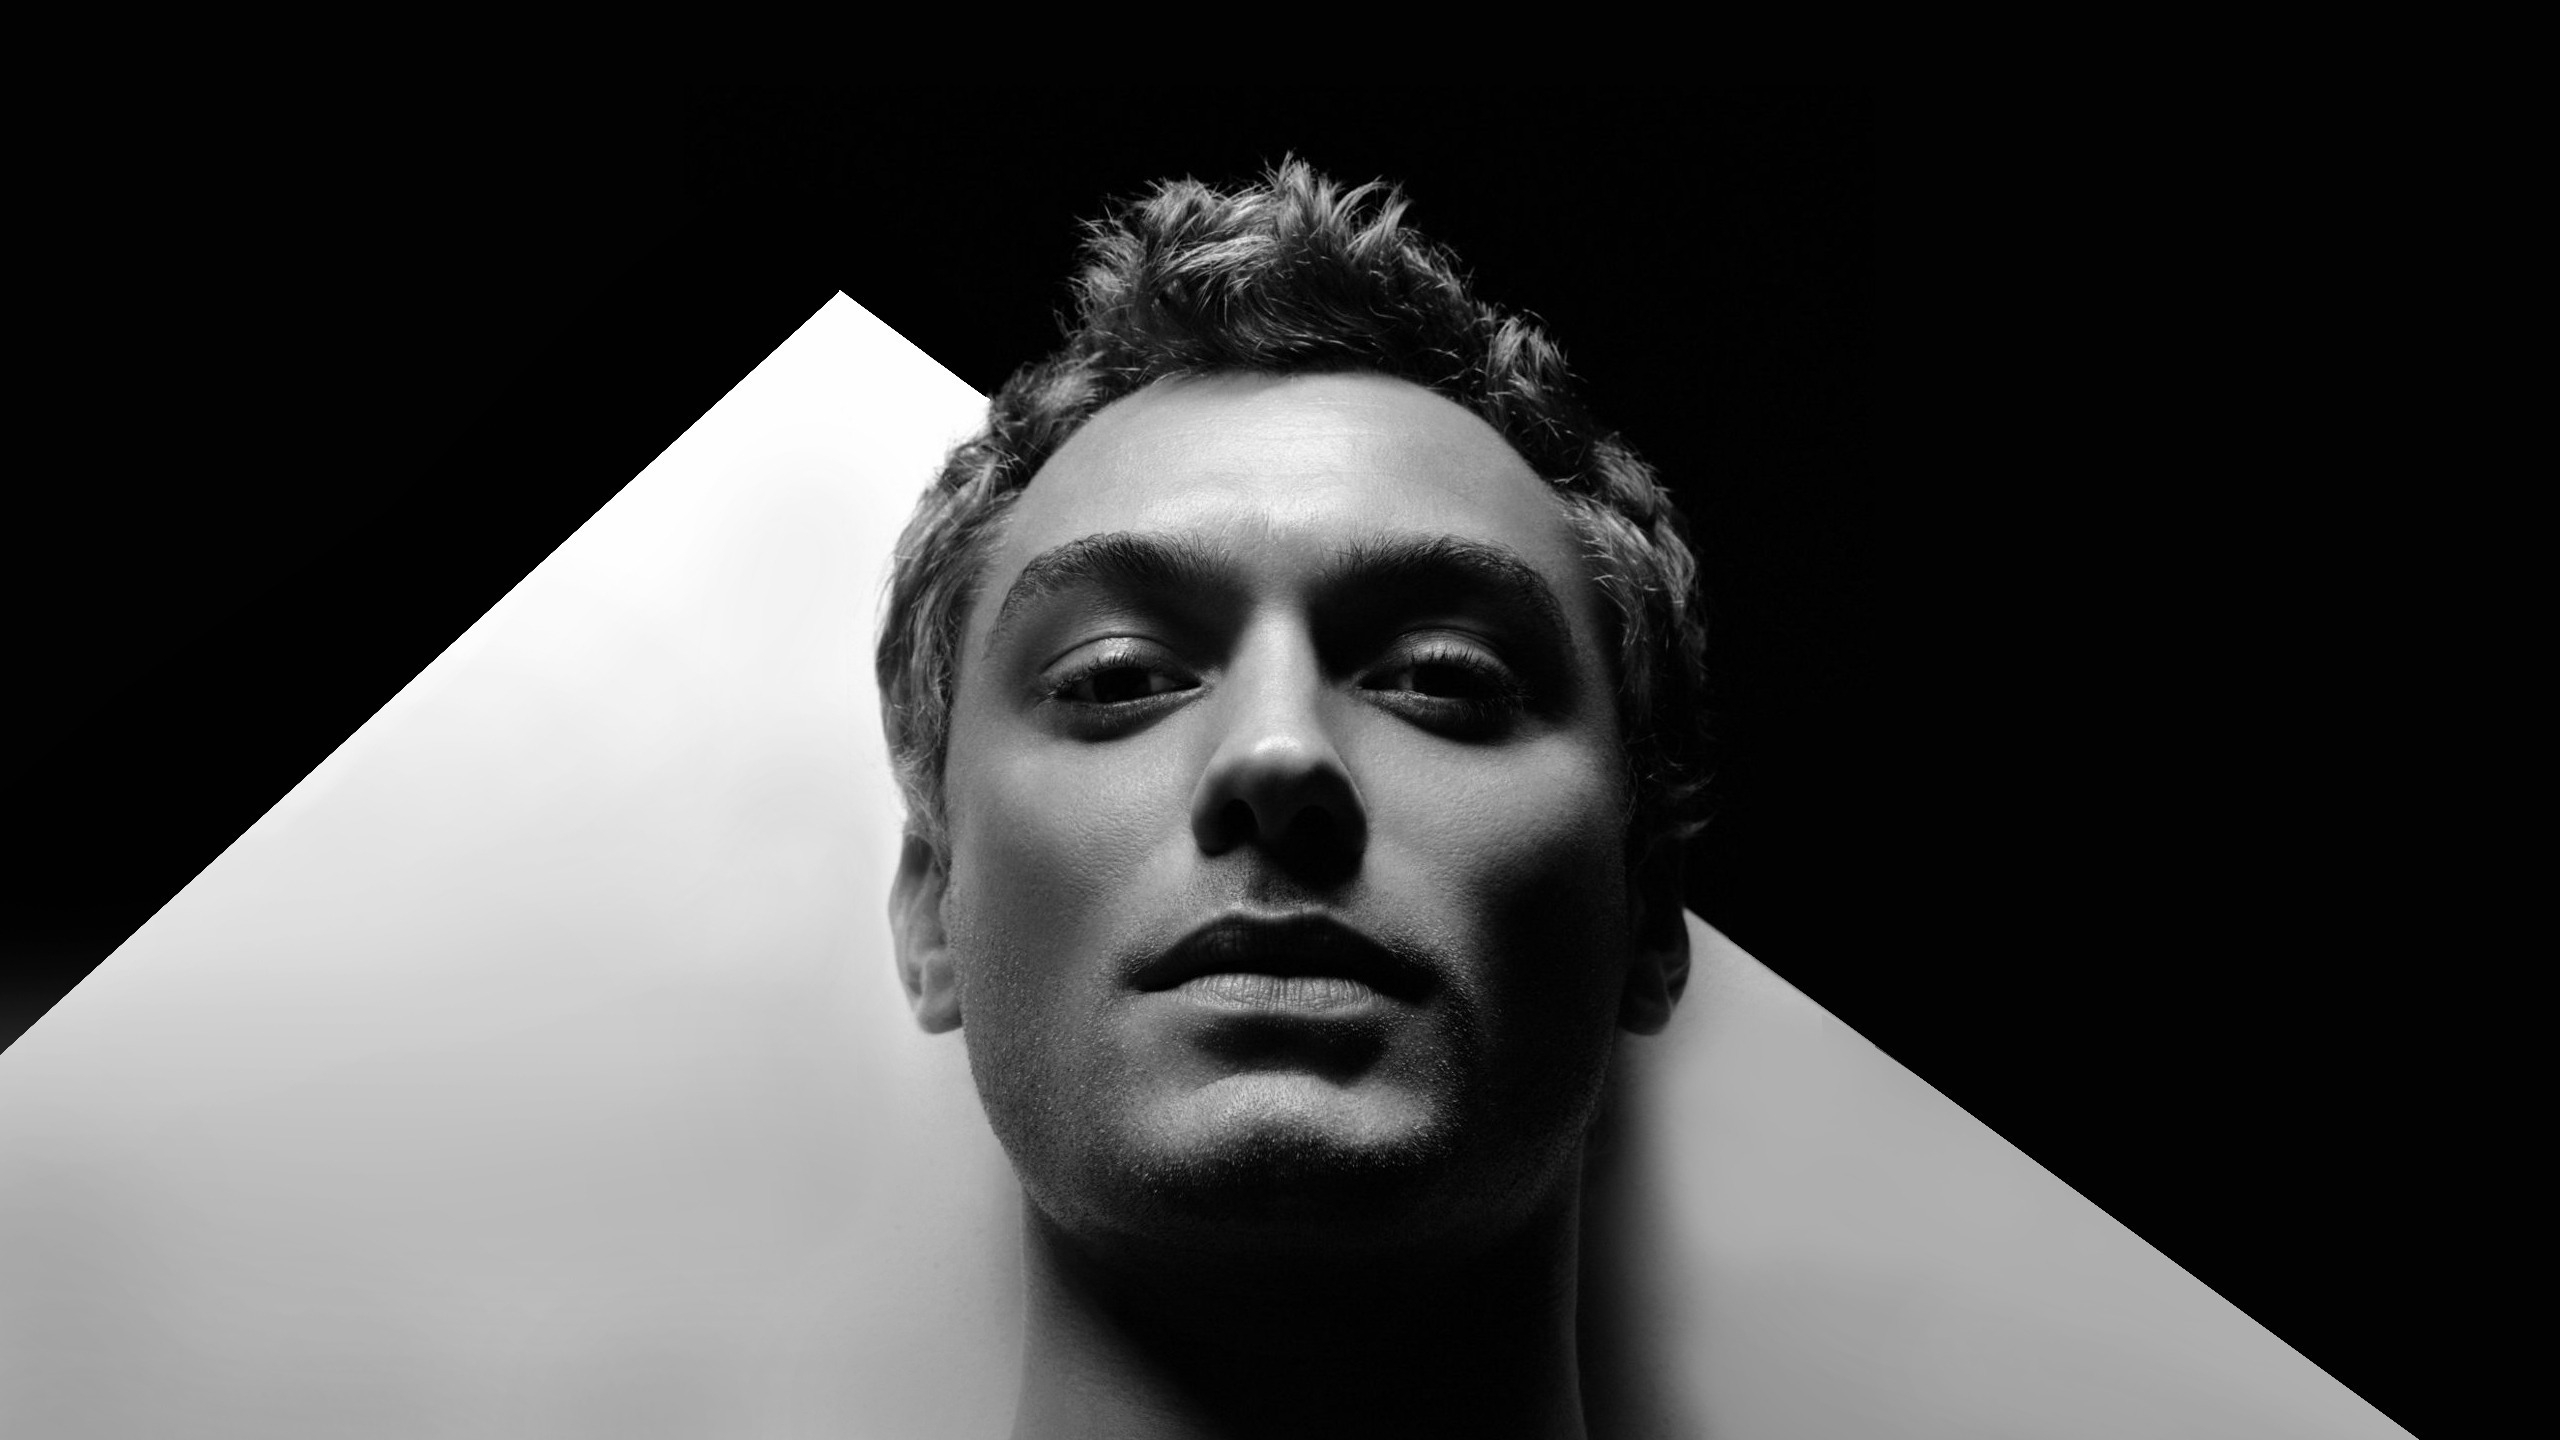 Jude Law for 2560x1440 HDTV resolution